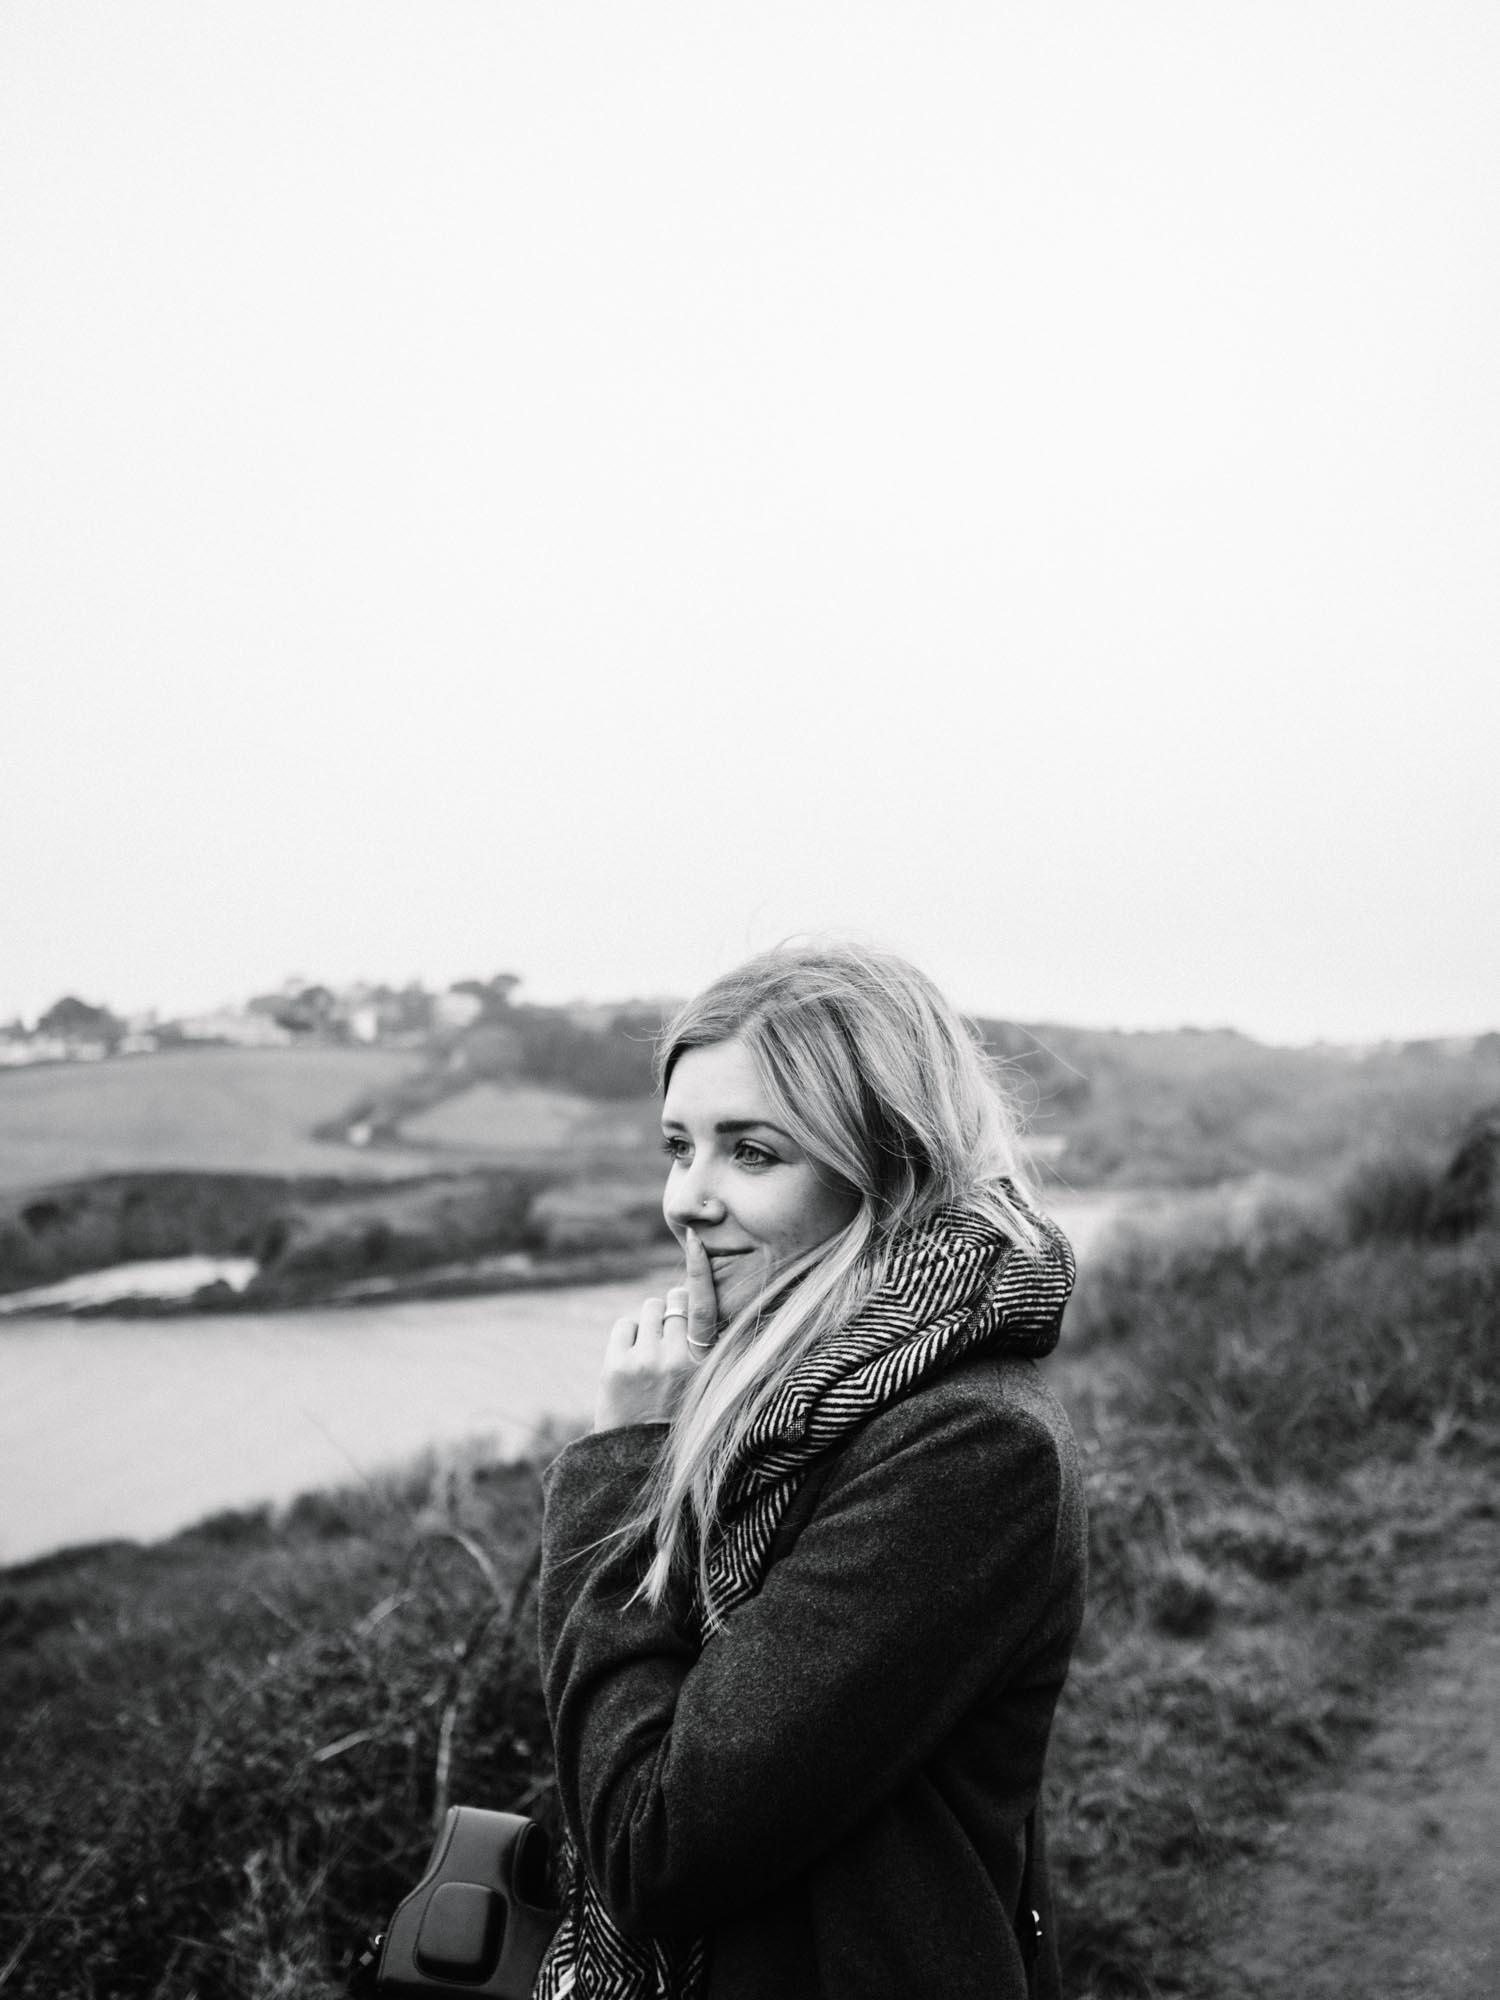  Here is Anna, once again, only this time, this image has been used for her web design business,  ByRosanna . The branding for ByRosanna is very different to that of The Cornish Life - it's much darker, more modern and slightly moody. These headshots of Anna were taken on a walk during Winter. By converting the images into black and white, the vibe was taken from being a bit too 